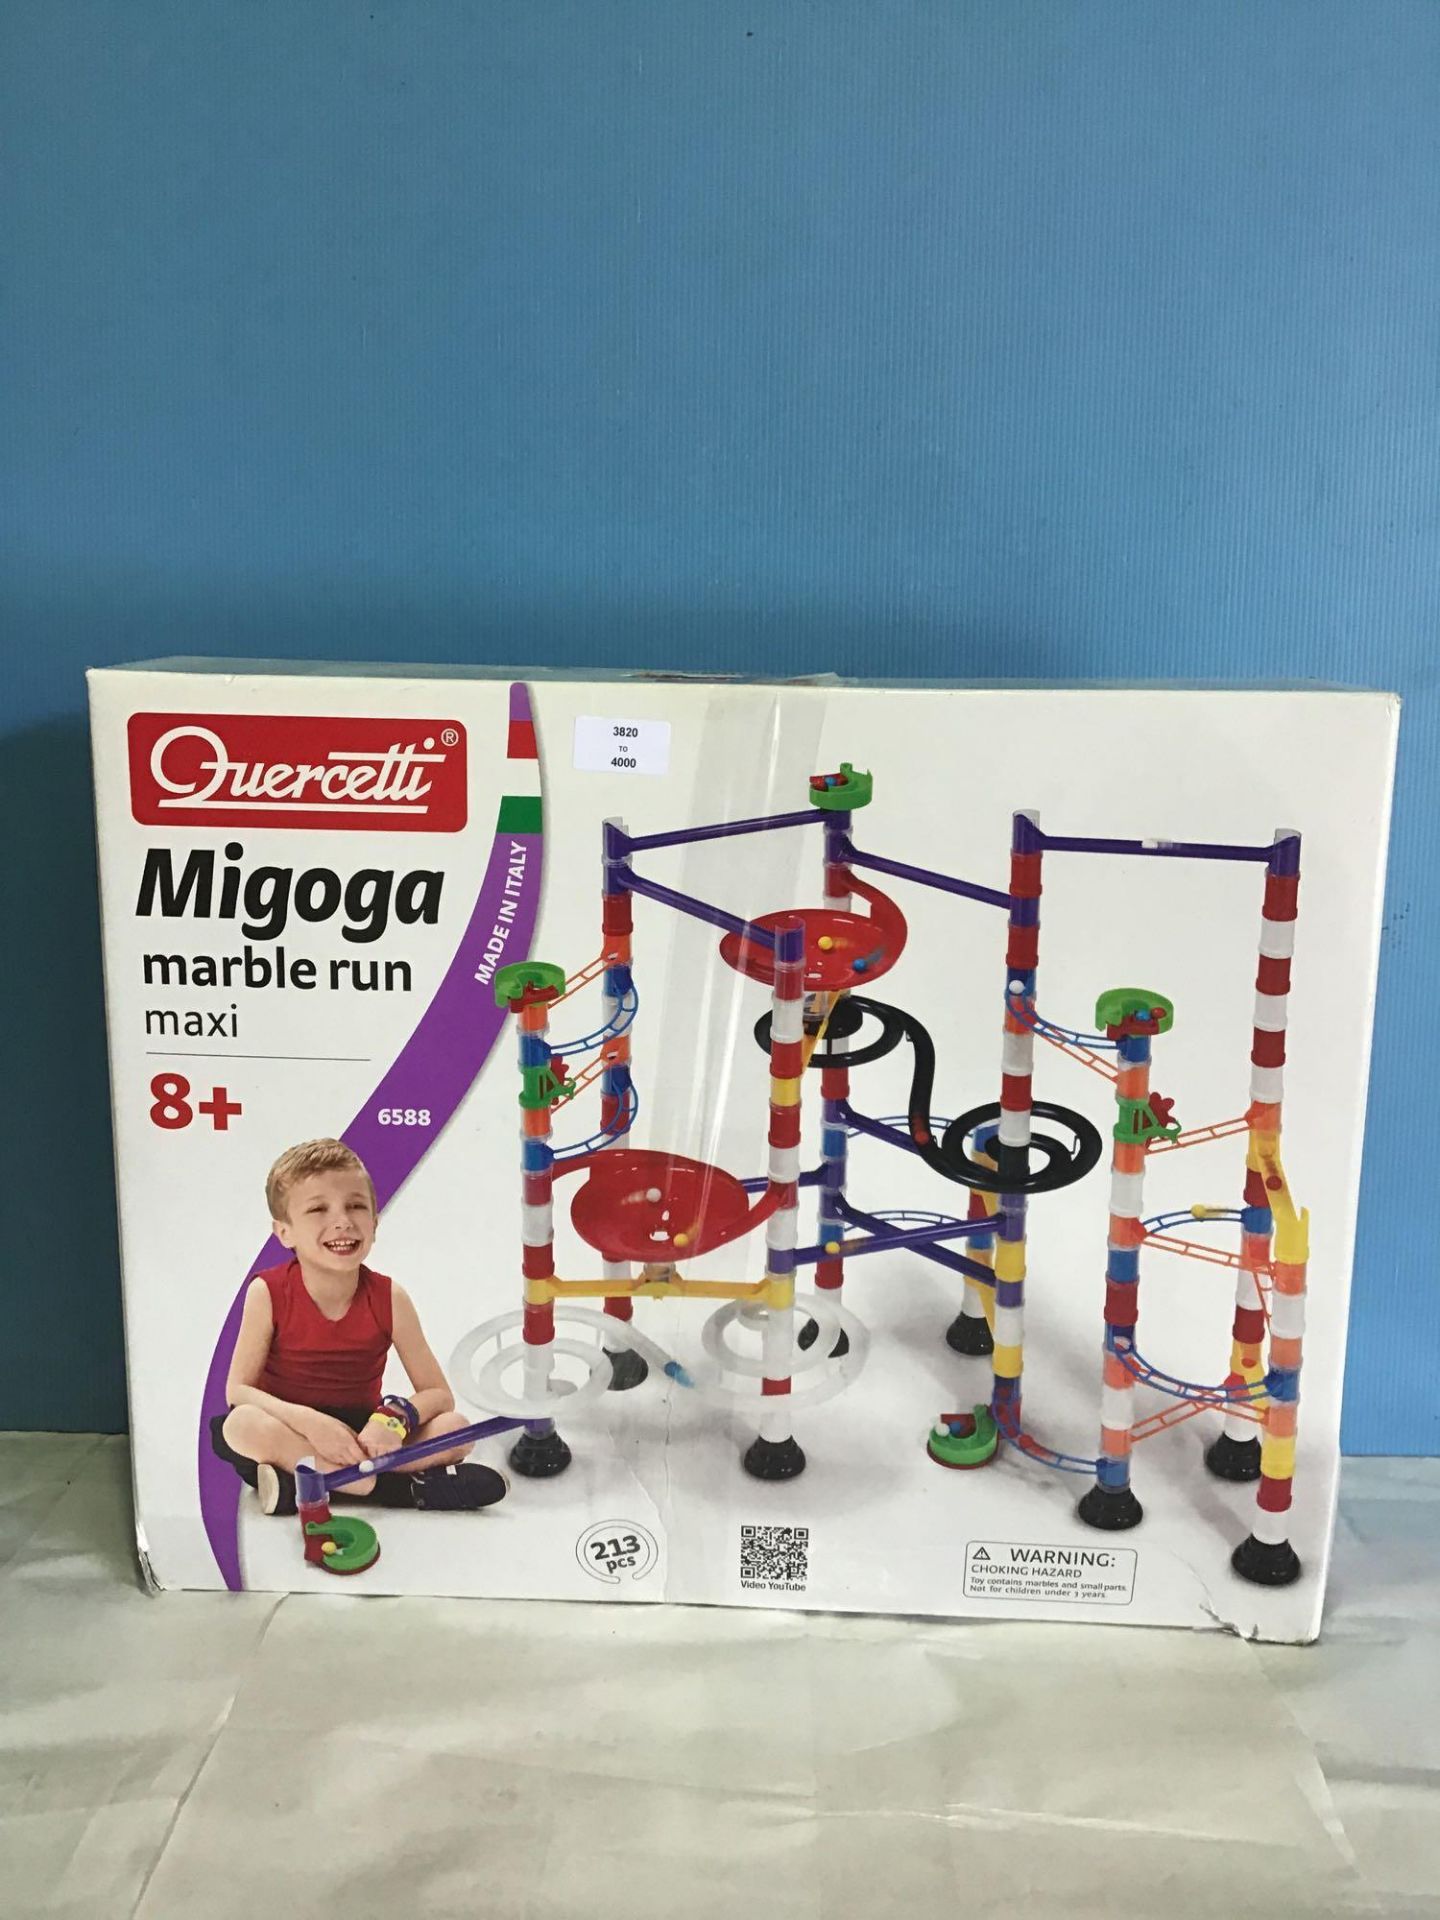 Quercetti-6588 Migoga Maxi Marble Runs STEM Educational Learning Toy, 8 Years - Image 2 of 5